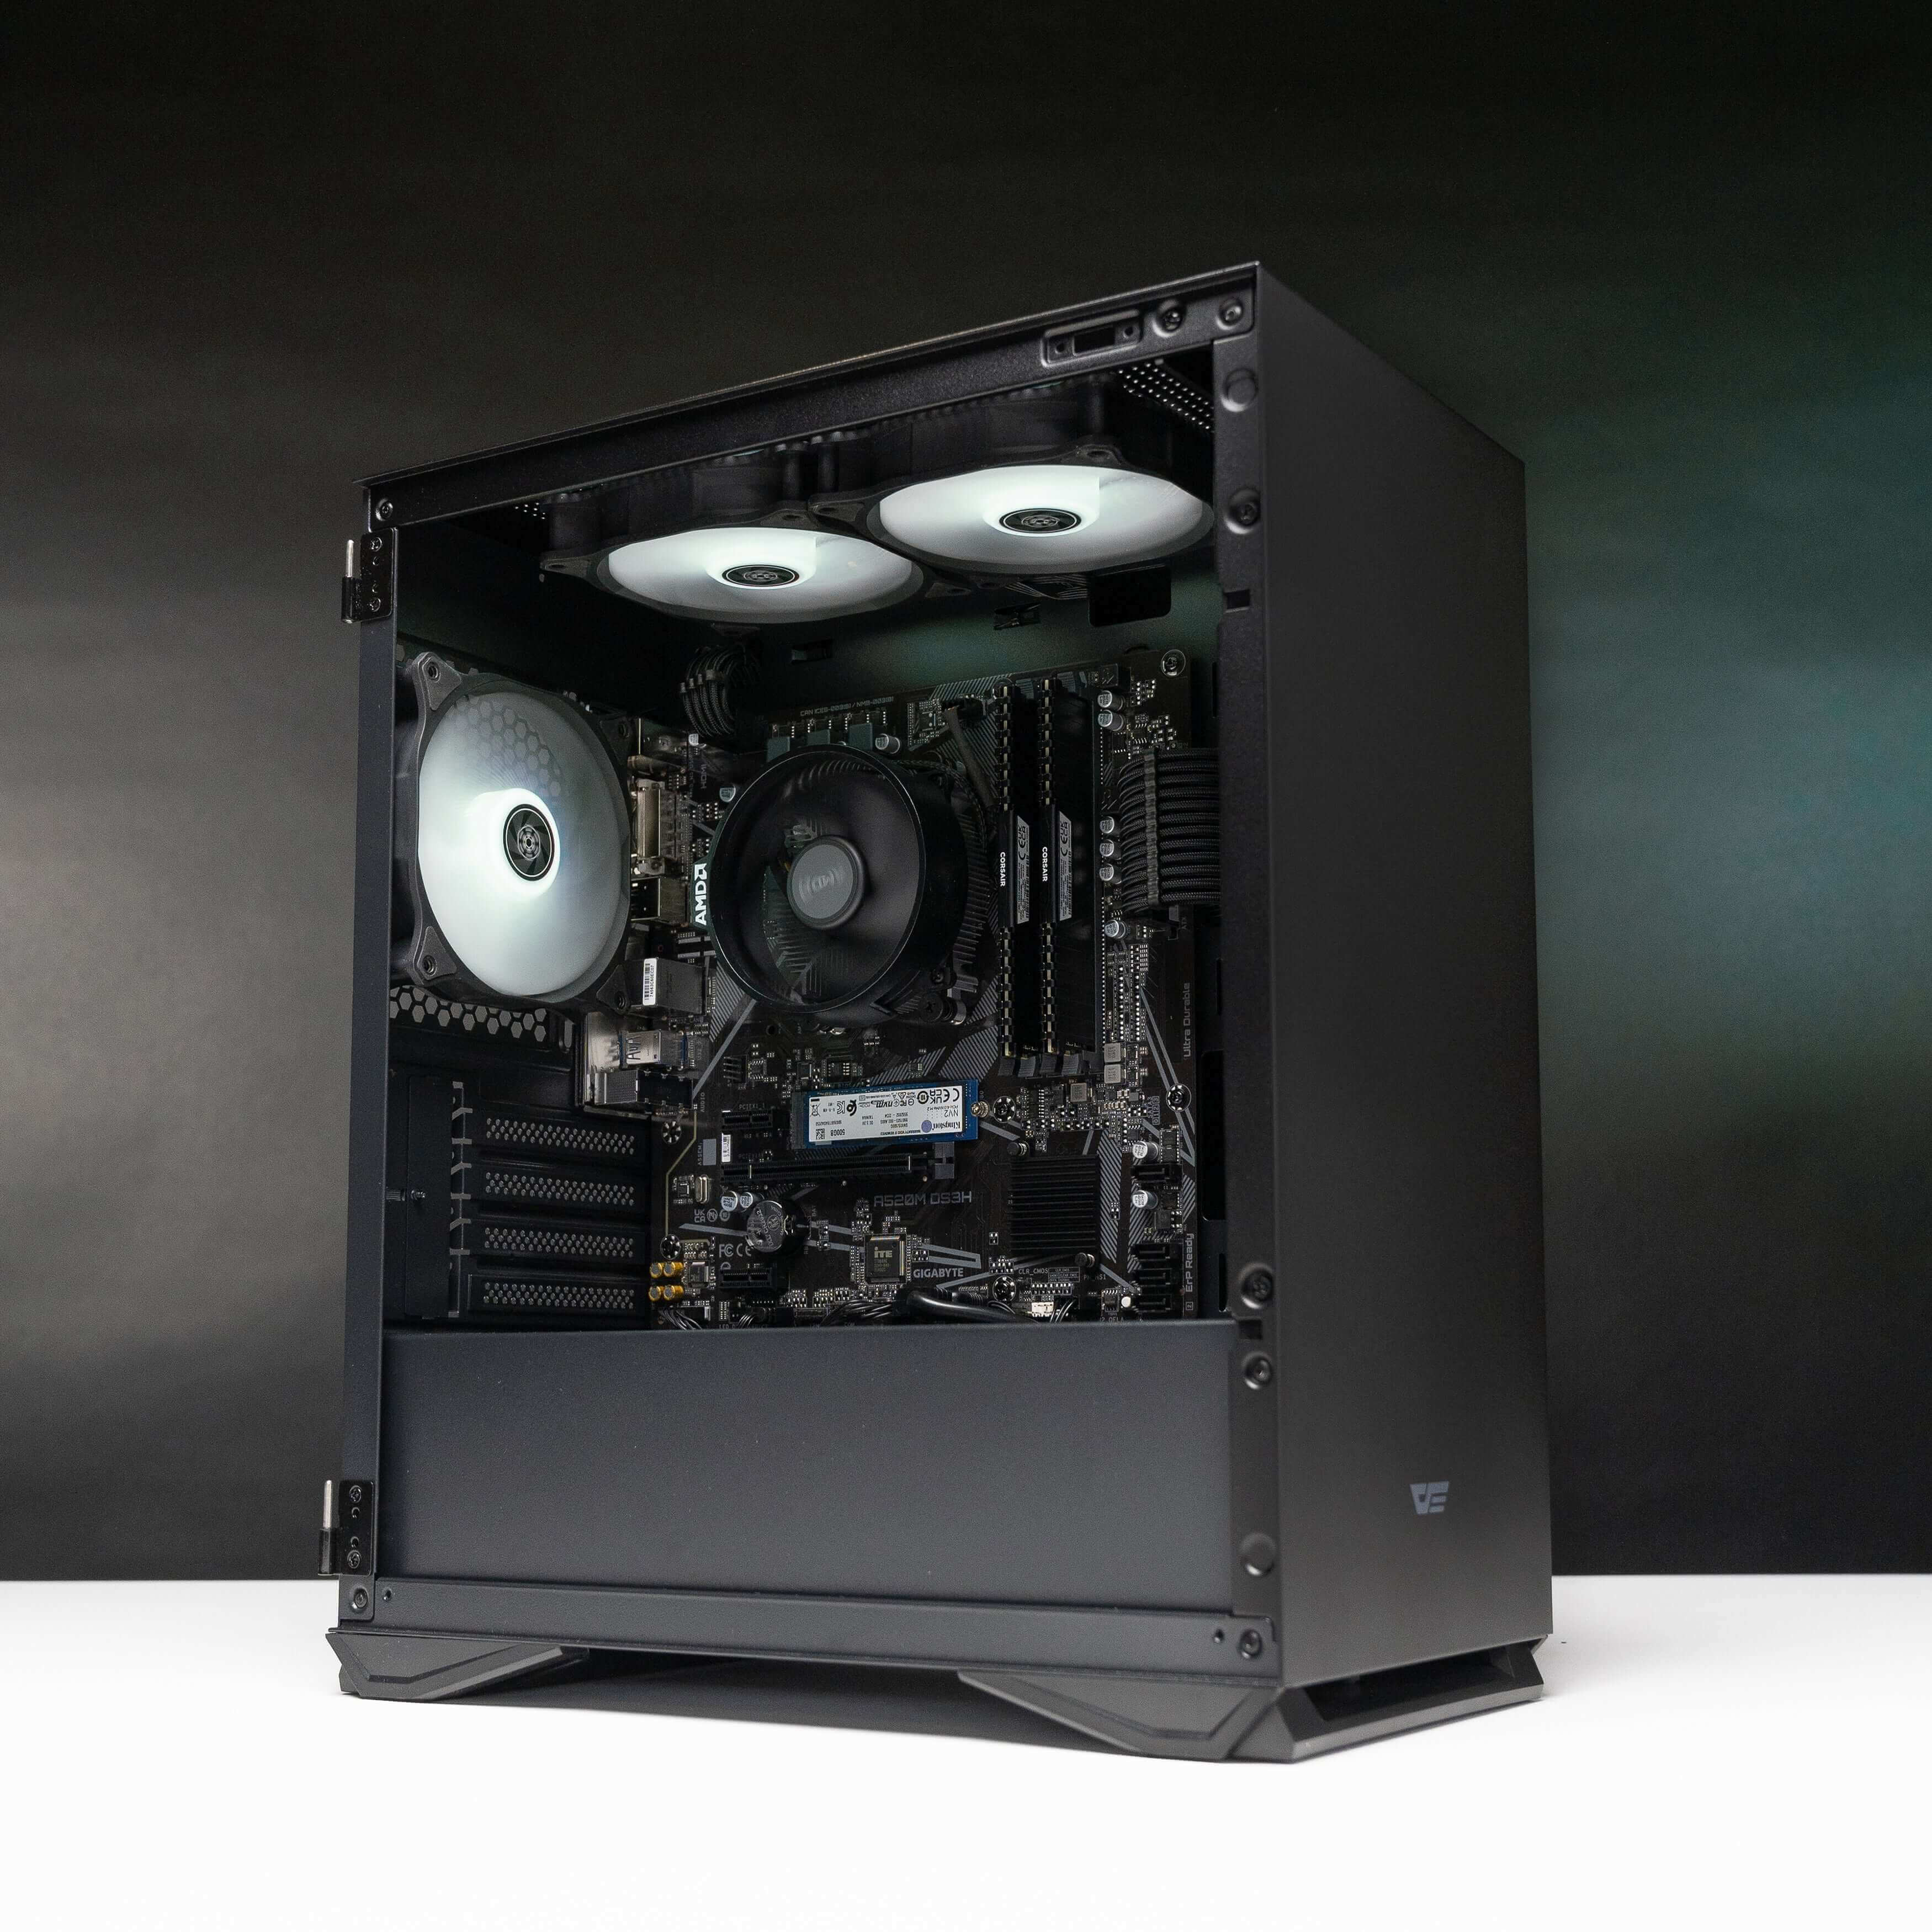 Side view of the powerful Arrow LVL 12 Gaming PC